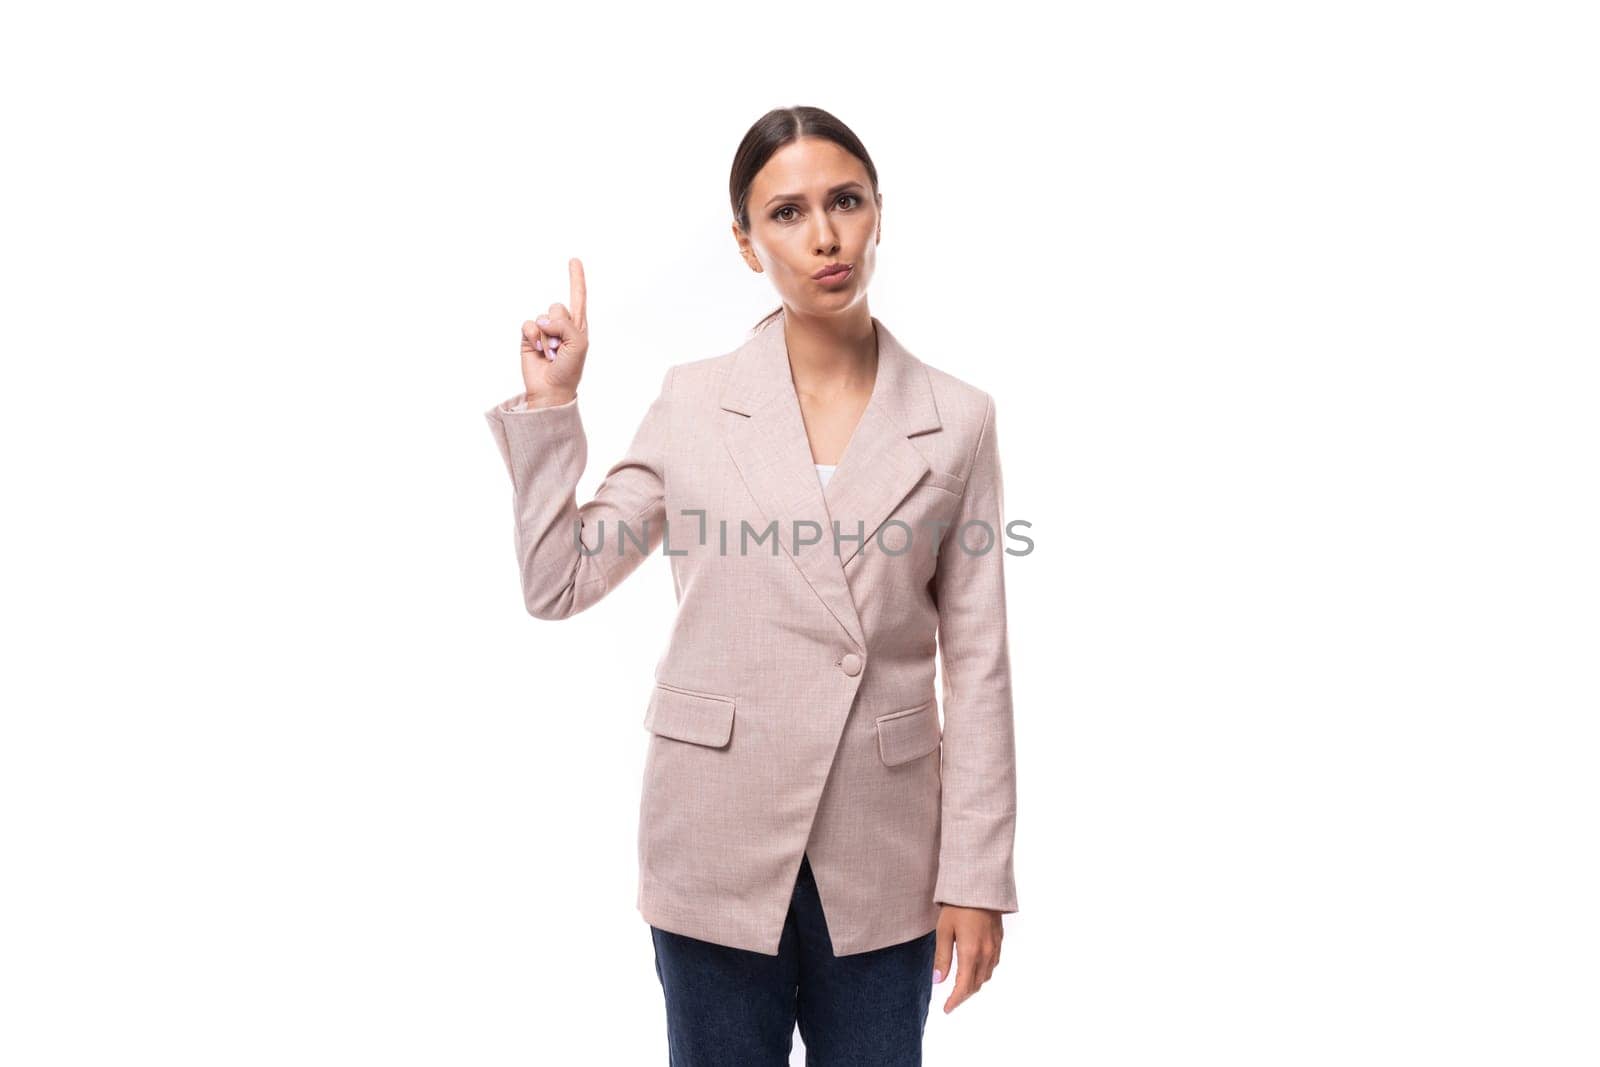 pleasant young woman with black hair in a jacket stands thoughtfully on a white background with copy space.